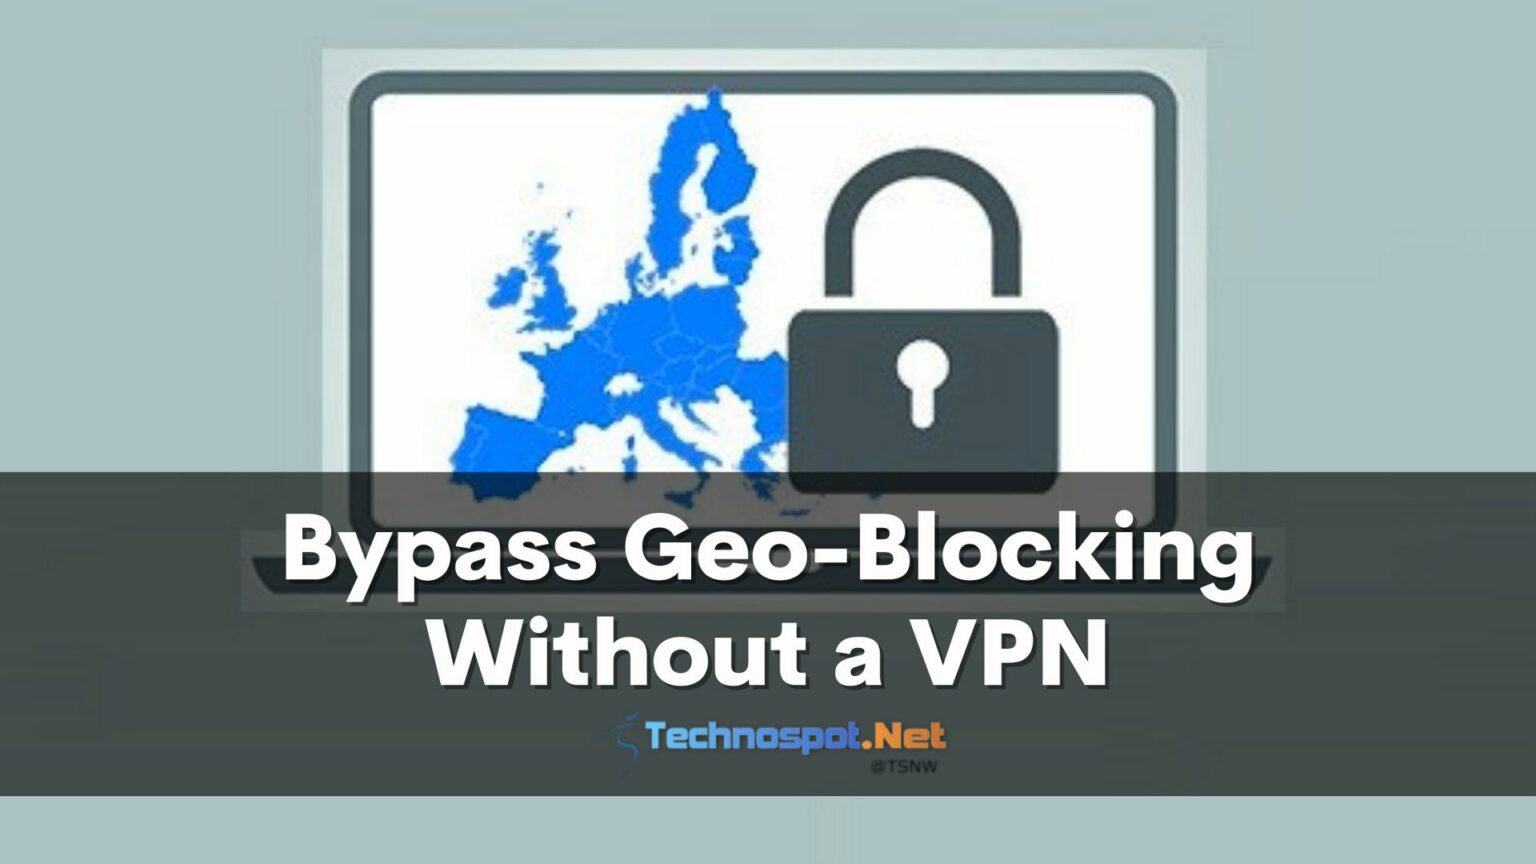 How to Bypass Geo-Blocking Without a VPN